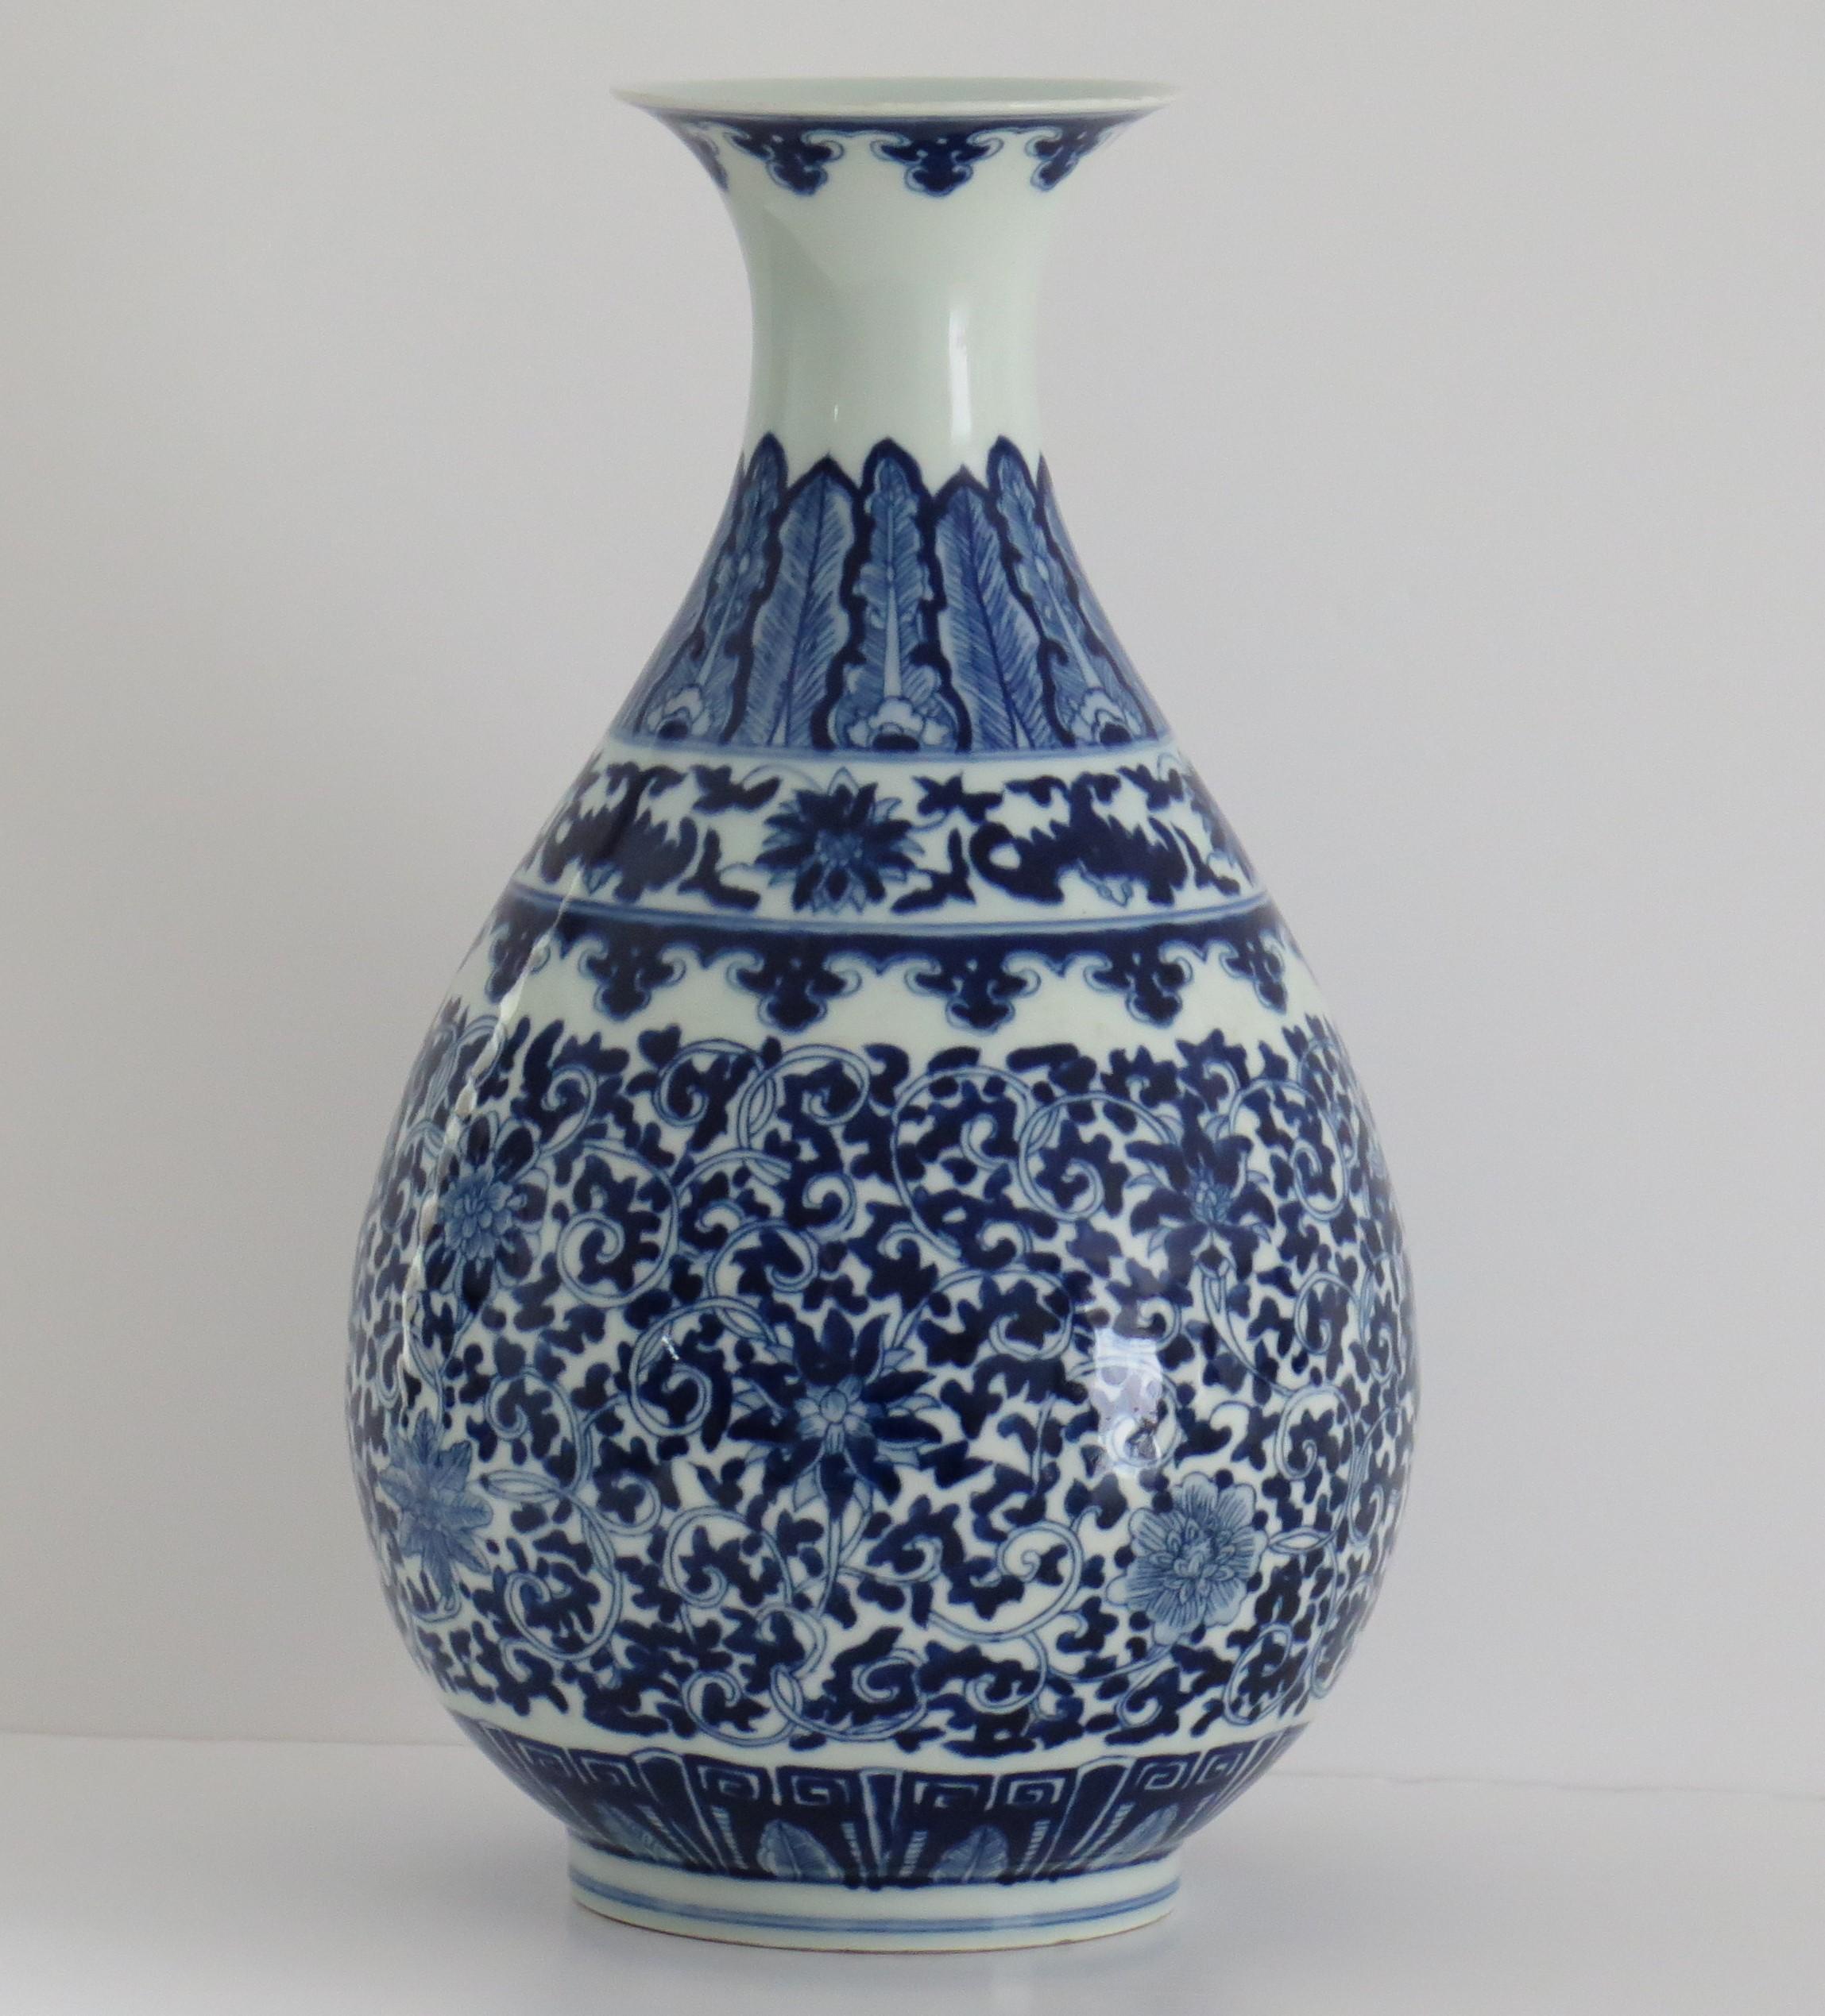 This is an elegant porcelain Chinese export porcelain Bottle Vase raised on a low foot, all hand painted in a blue and white pattern, which we date to the early 20th century, circa 1920.

The vase is very well hand potted in a Classic bottle shape